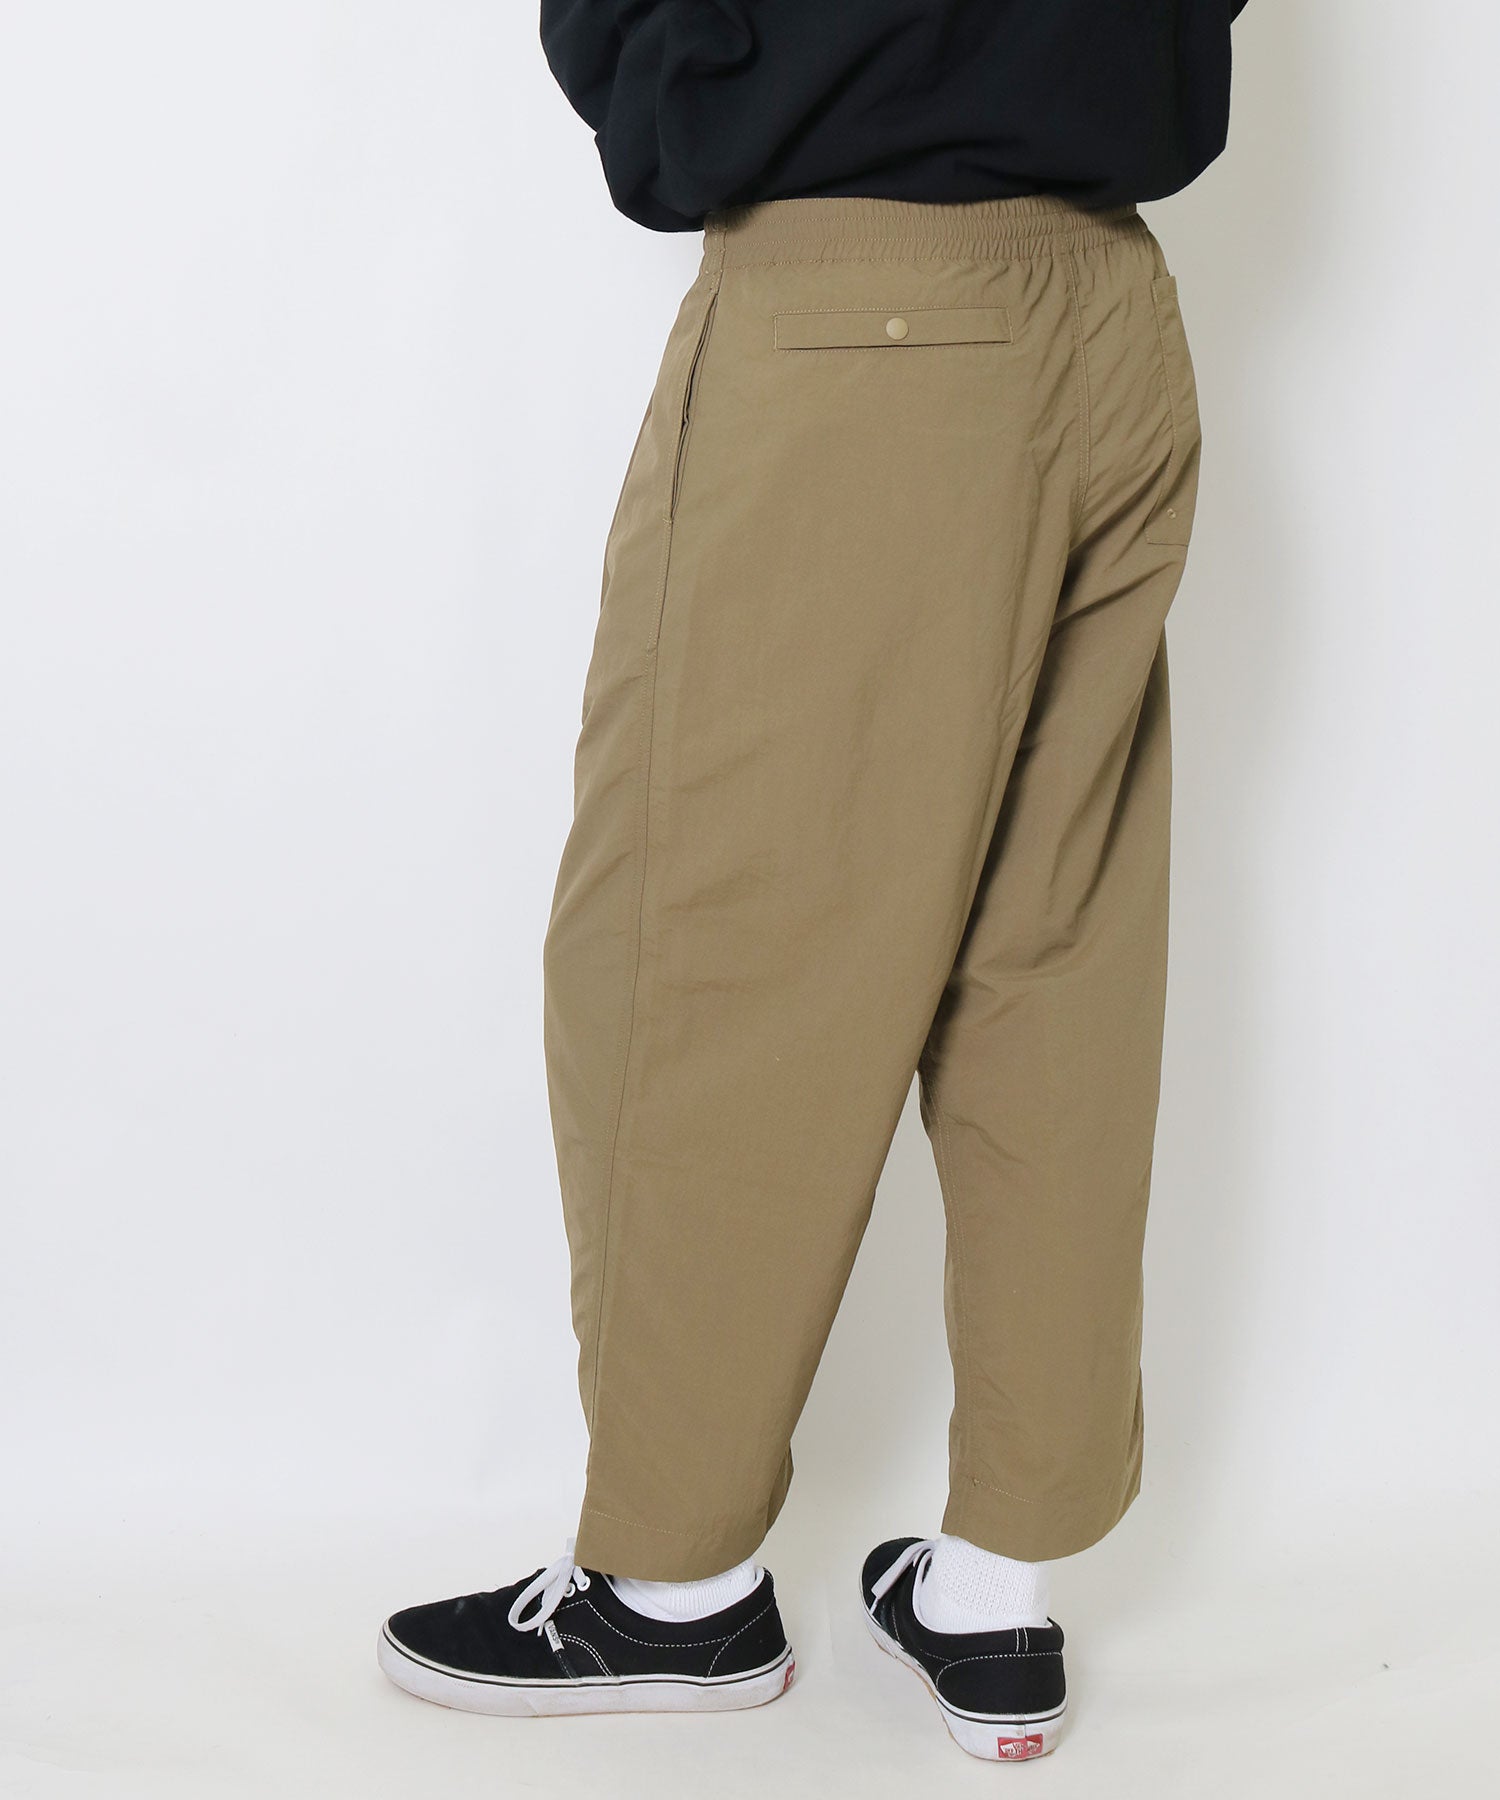 BURLAP OUTFITTER 【バーラップアウトフィッター】 - WIDE TRACK PANT